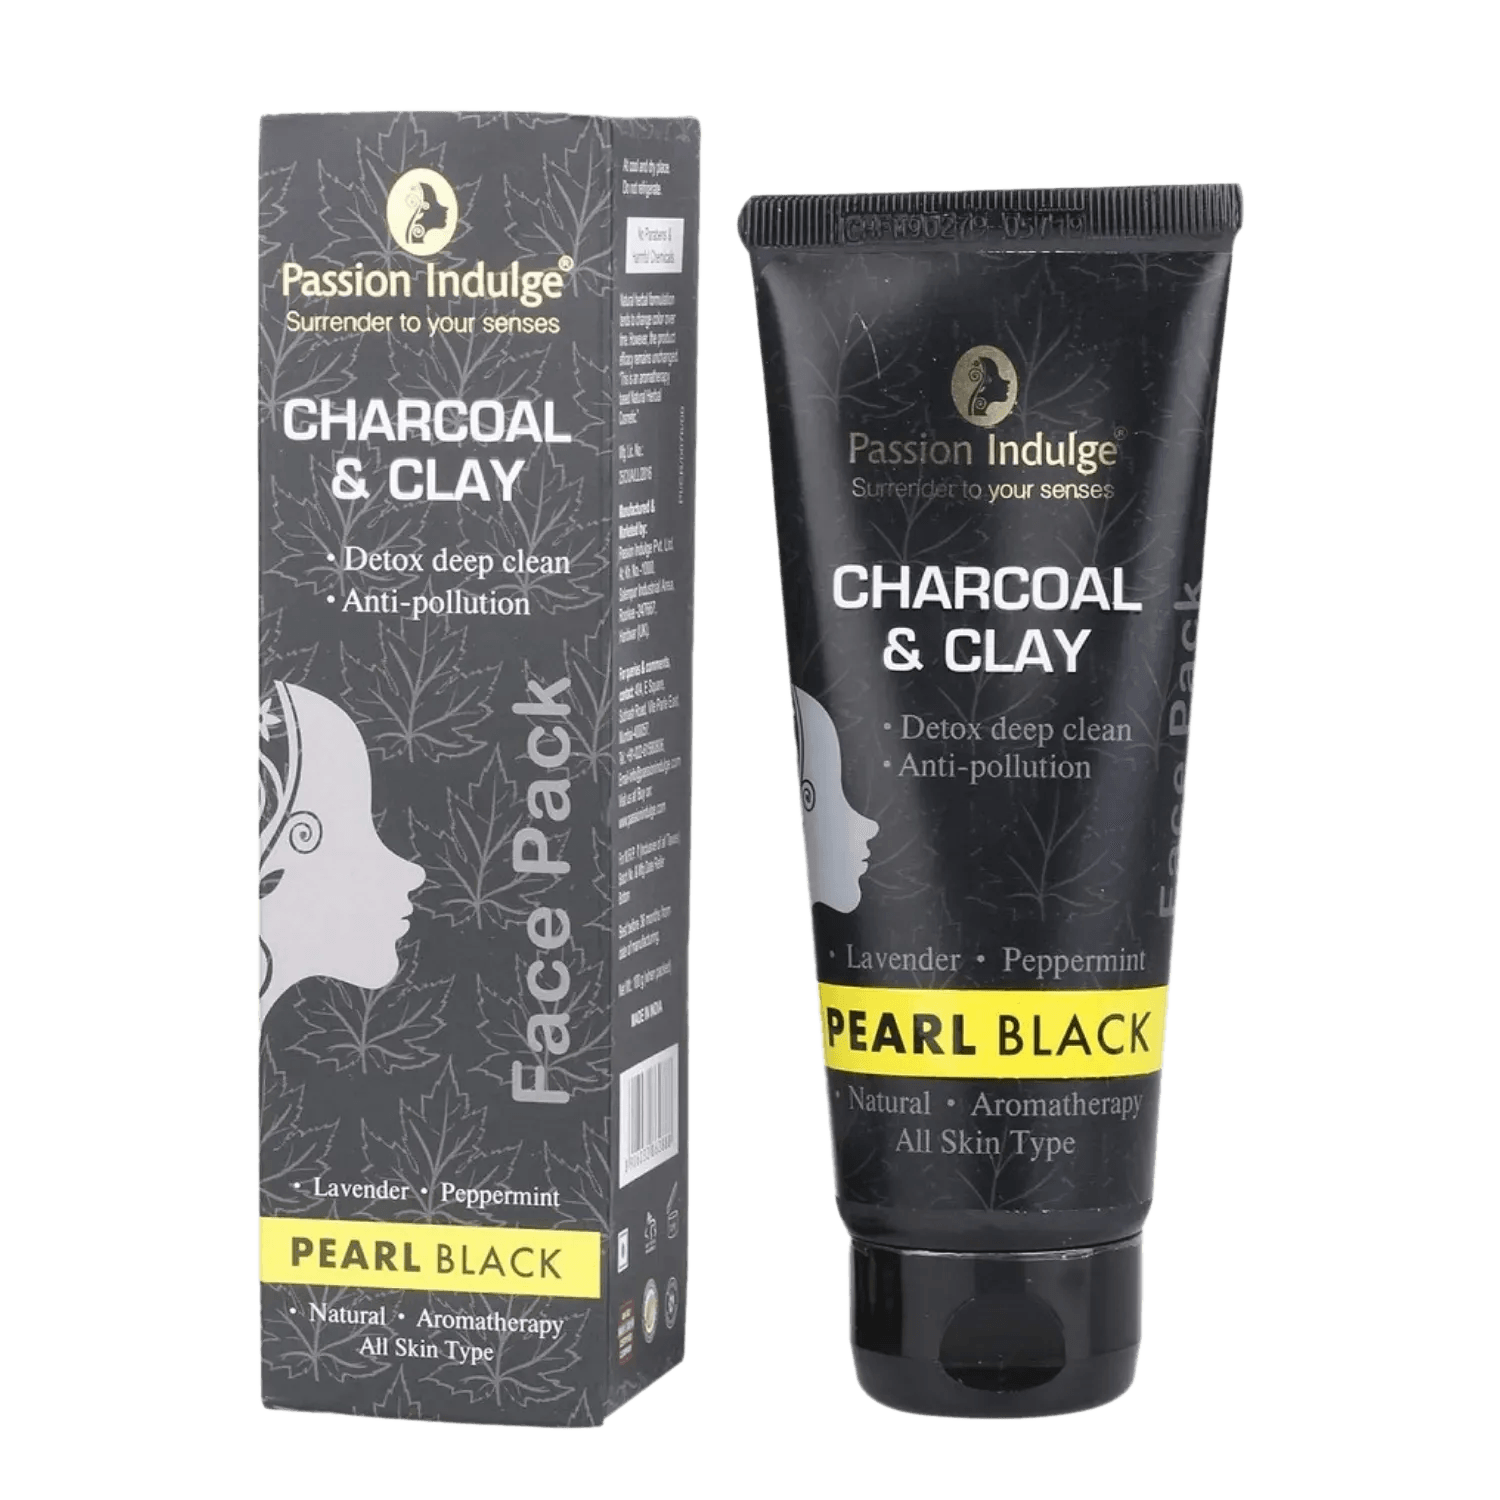 Passion Indulge | Passion Indulge Pearl Black Face Mudd - Charcoal & Clay (100g)